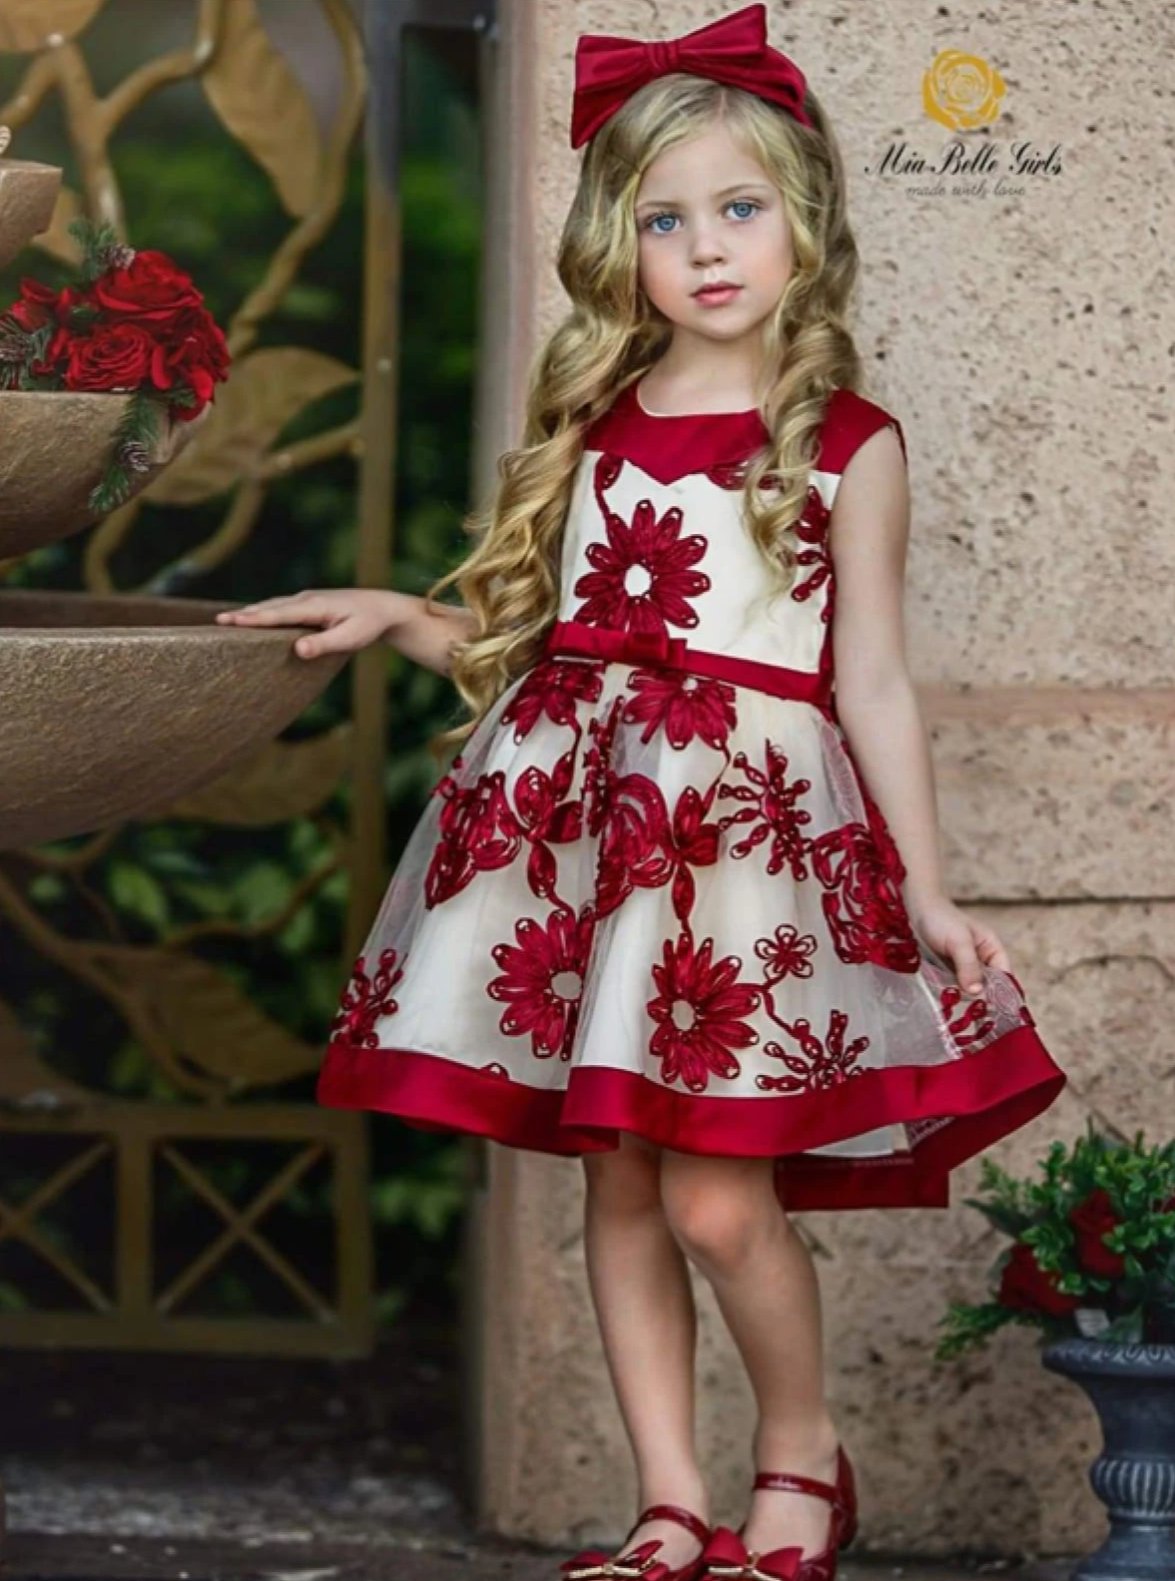 Girls Monogrammed Christmas Dress Toddler Winter Outfit 